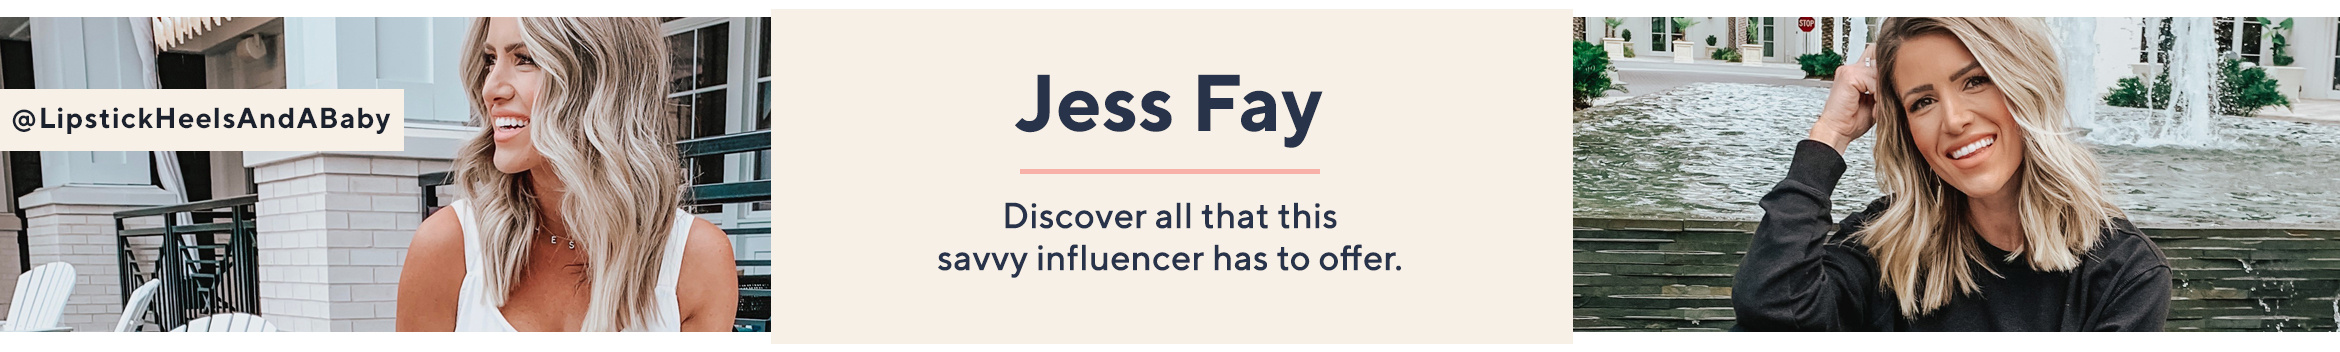 Jess Fay  Discover all that this savvy influencer has to offer.  